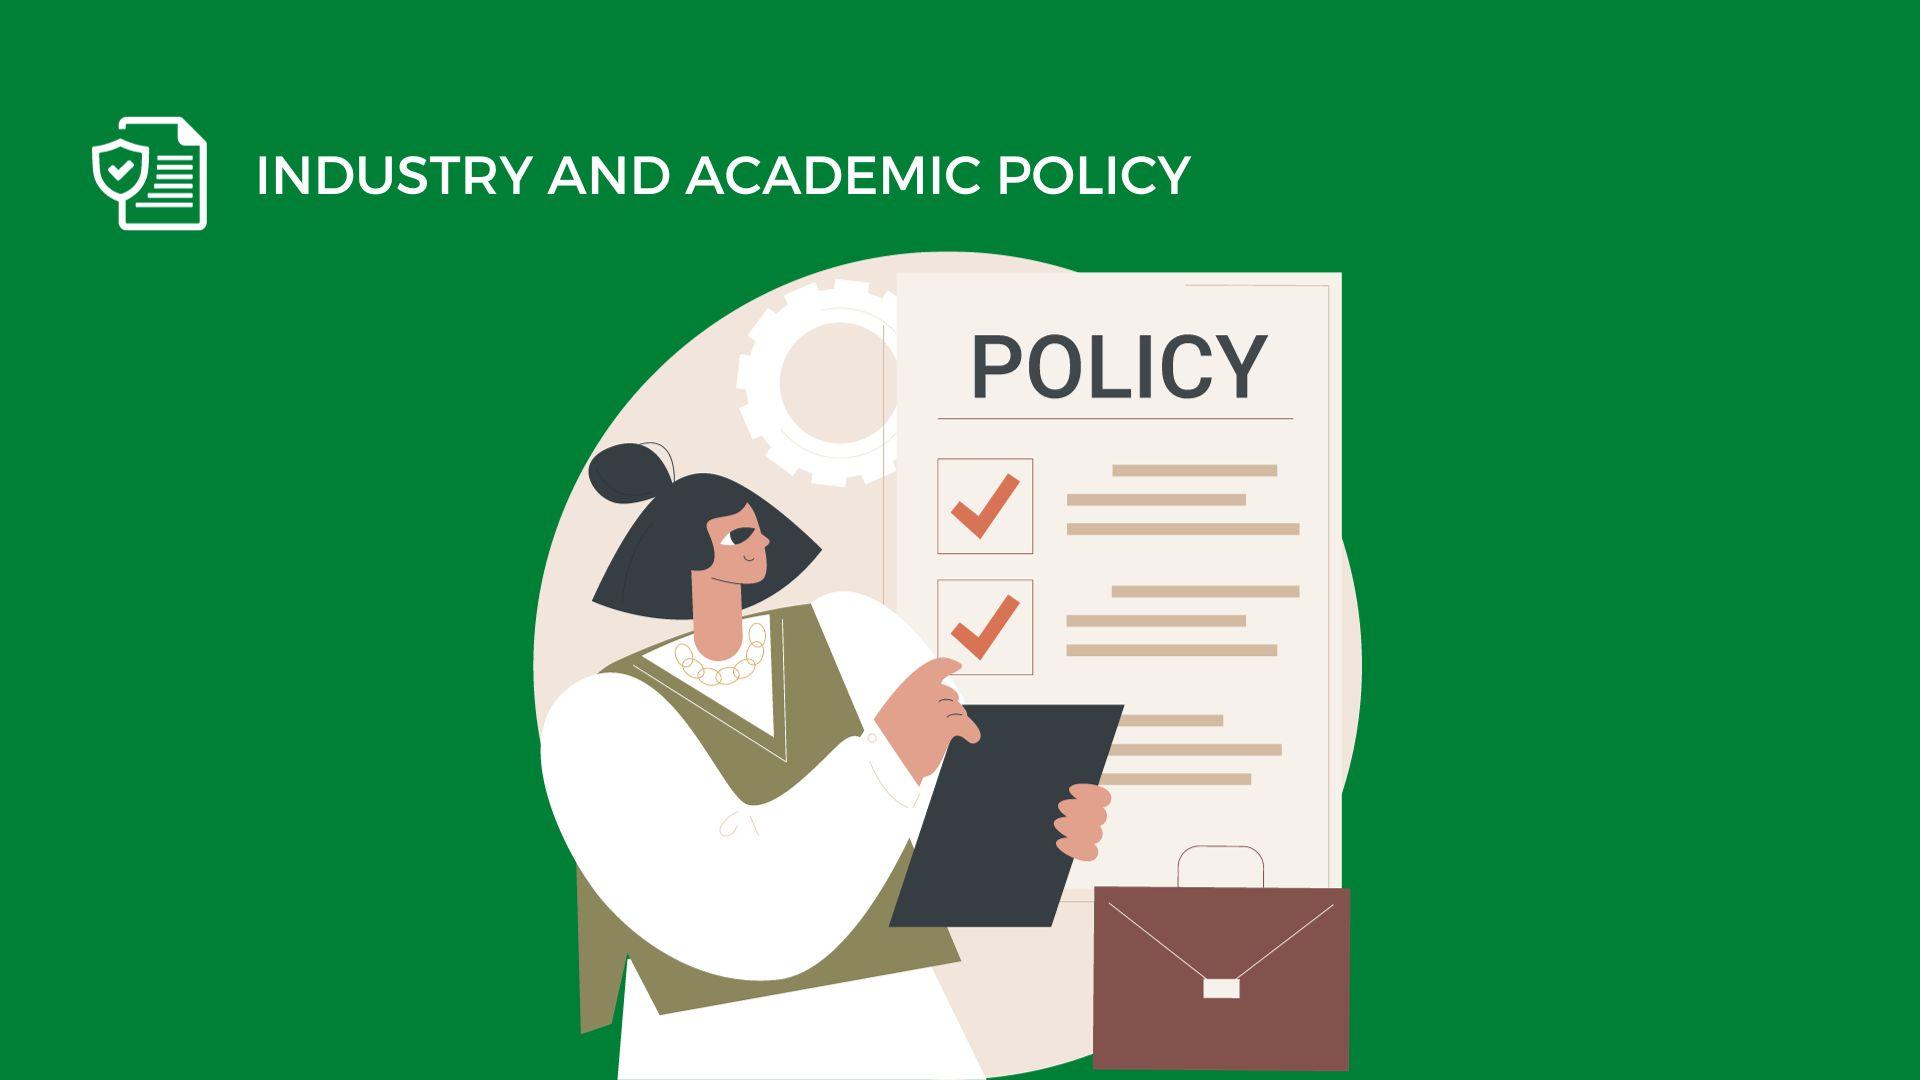 Industry and Academic Policy Deccan college of enginering and Technology